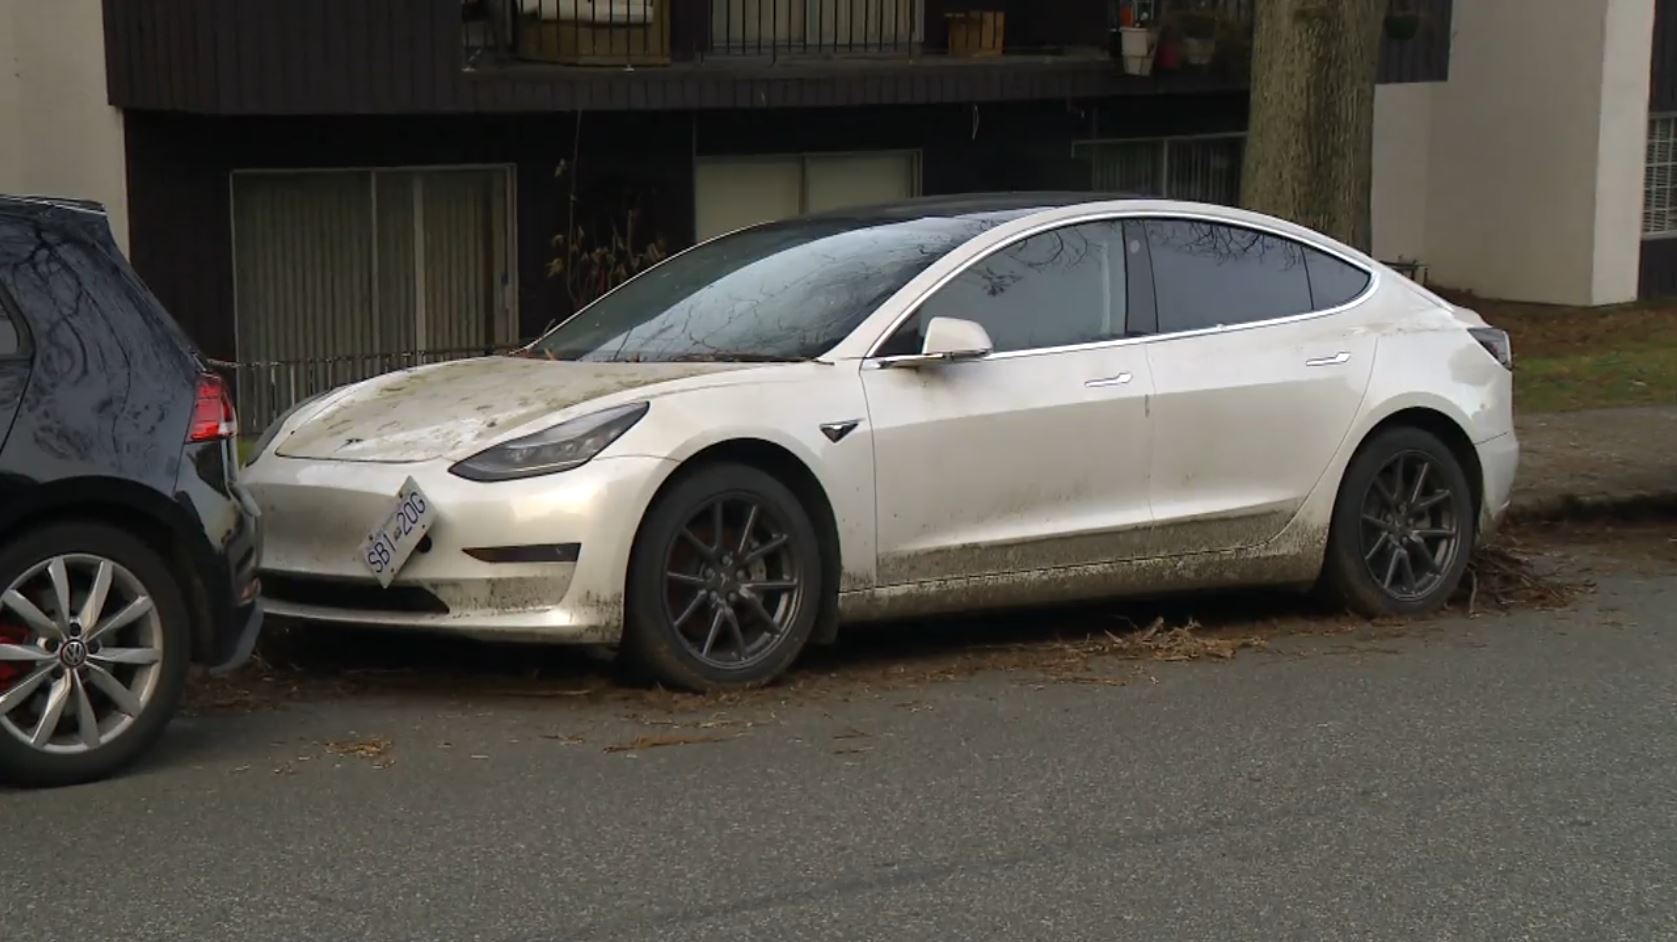 Vancouver residents left wondering about mysterious Tesla that appears abandoned